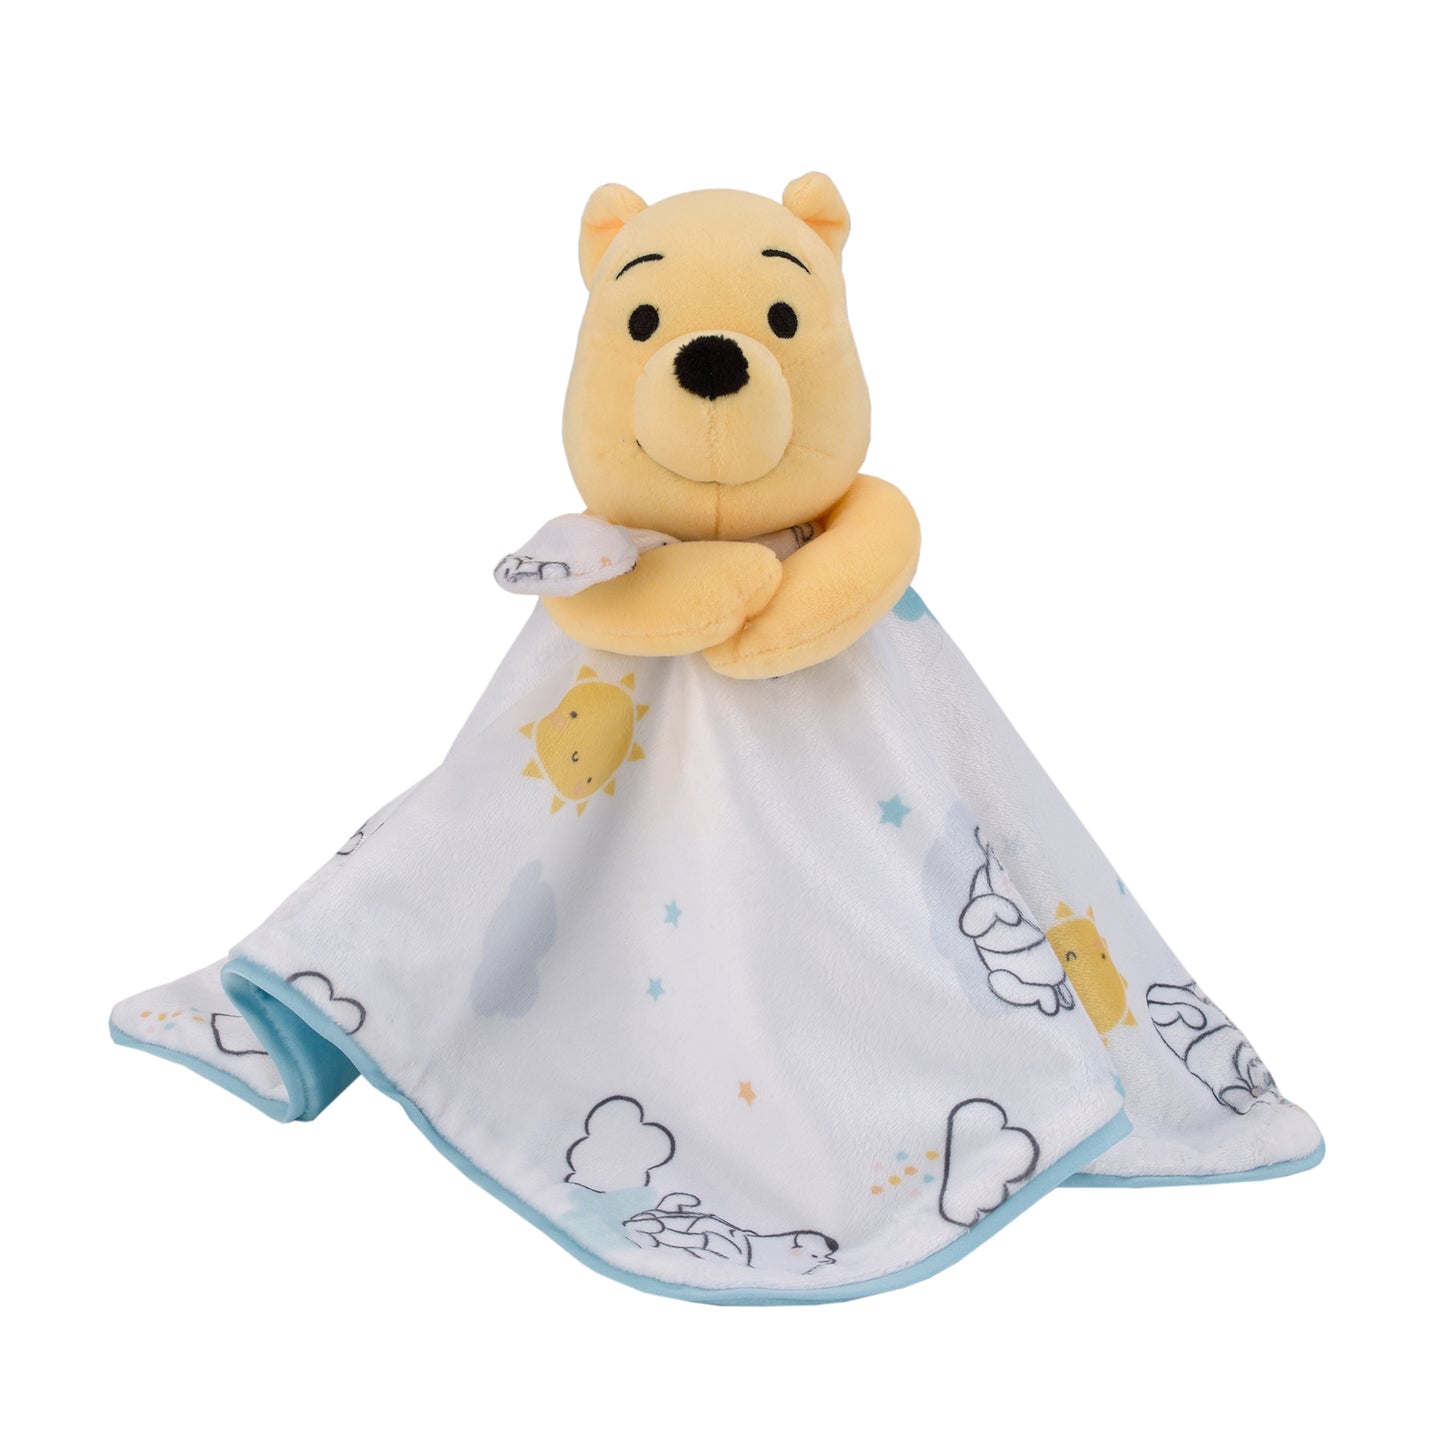 Disney Winnie the Pooh White, Yellow, and Aqua Sunshine and Clouds Super Soft Sherpa Baby Blanket and Security Blanket 2-Piece Gift Set